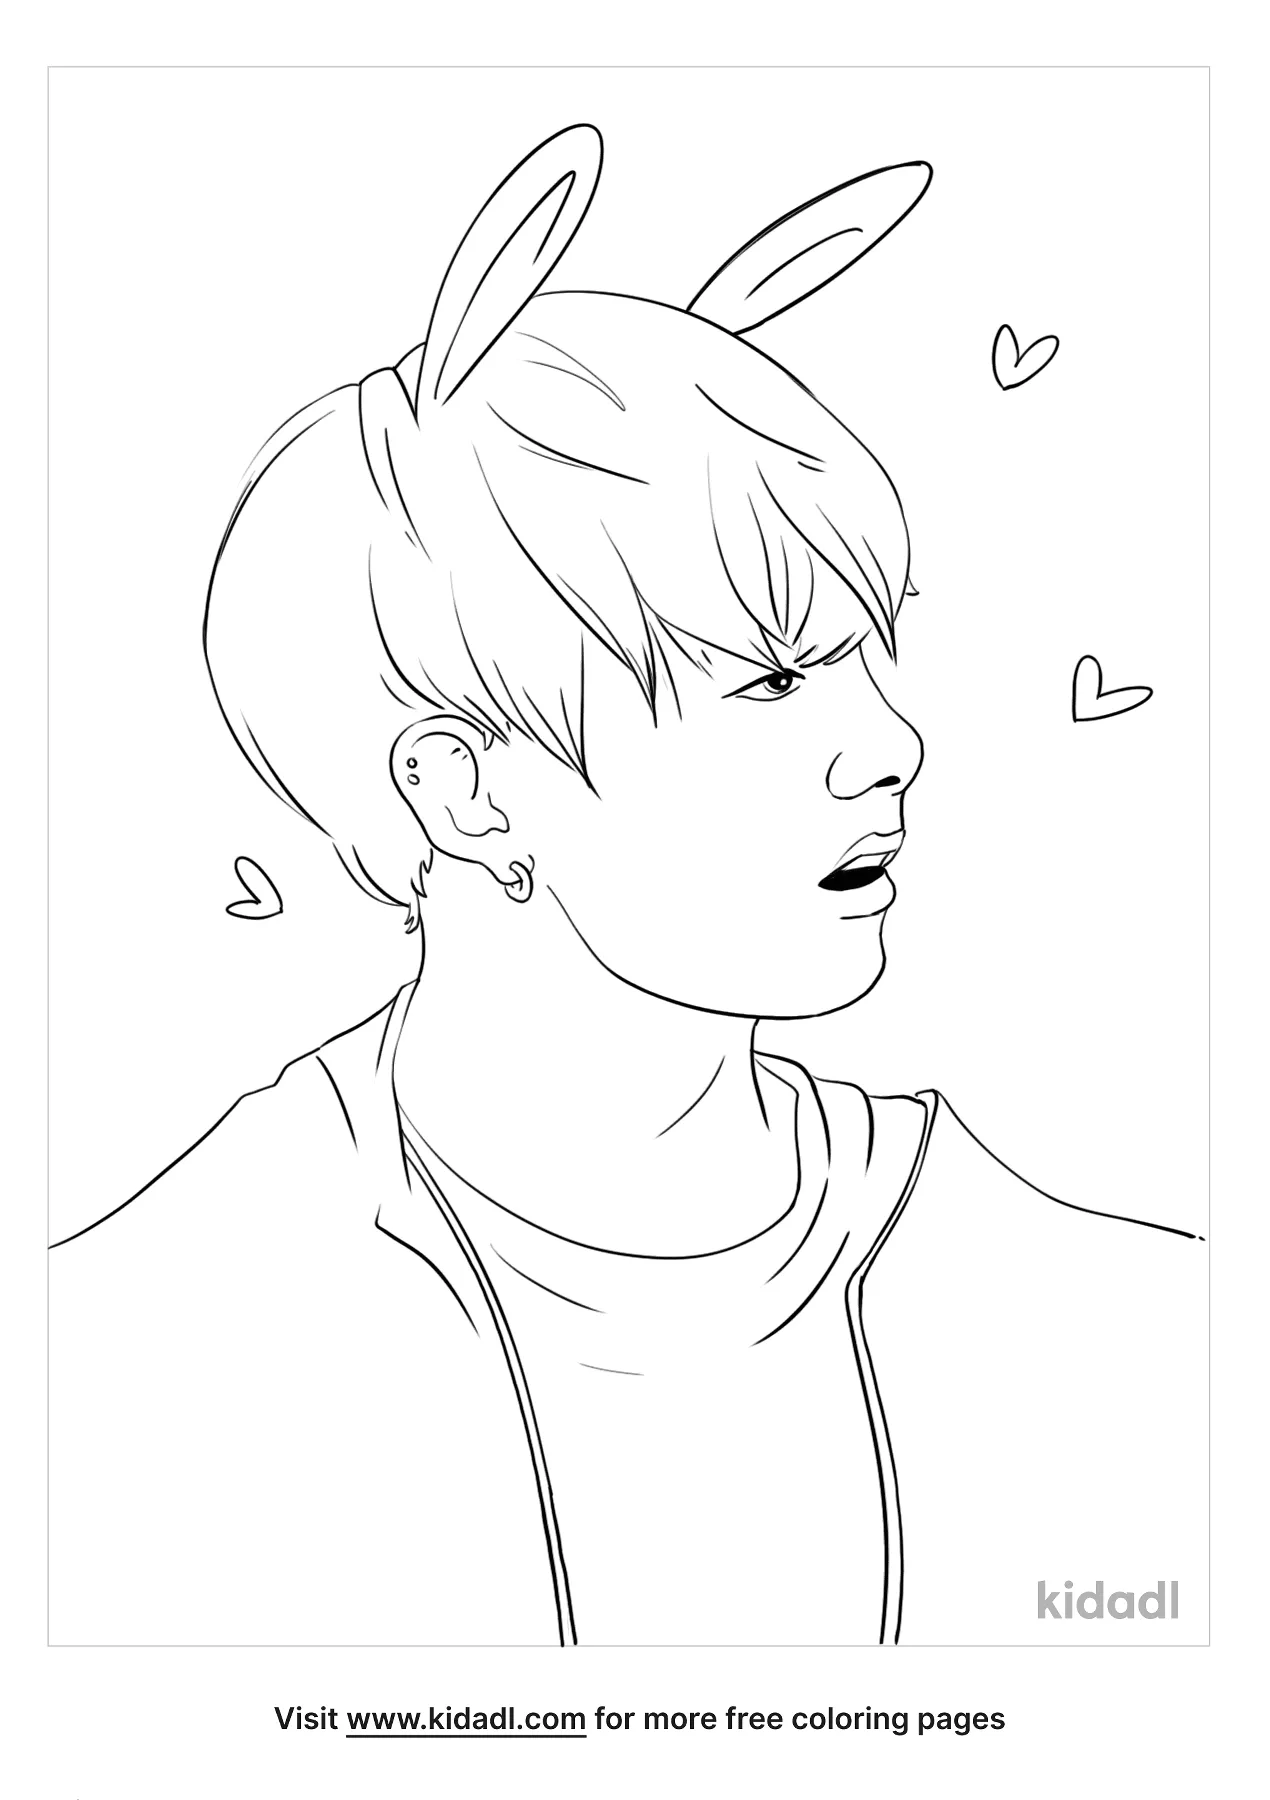 Download Bts Coloring Pages Free People Coloring Pages Kidadl